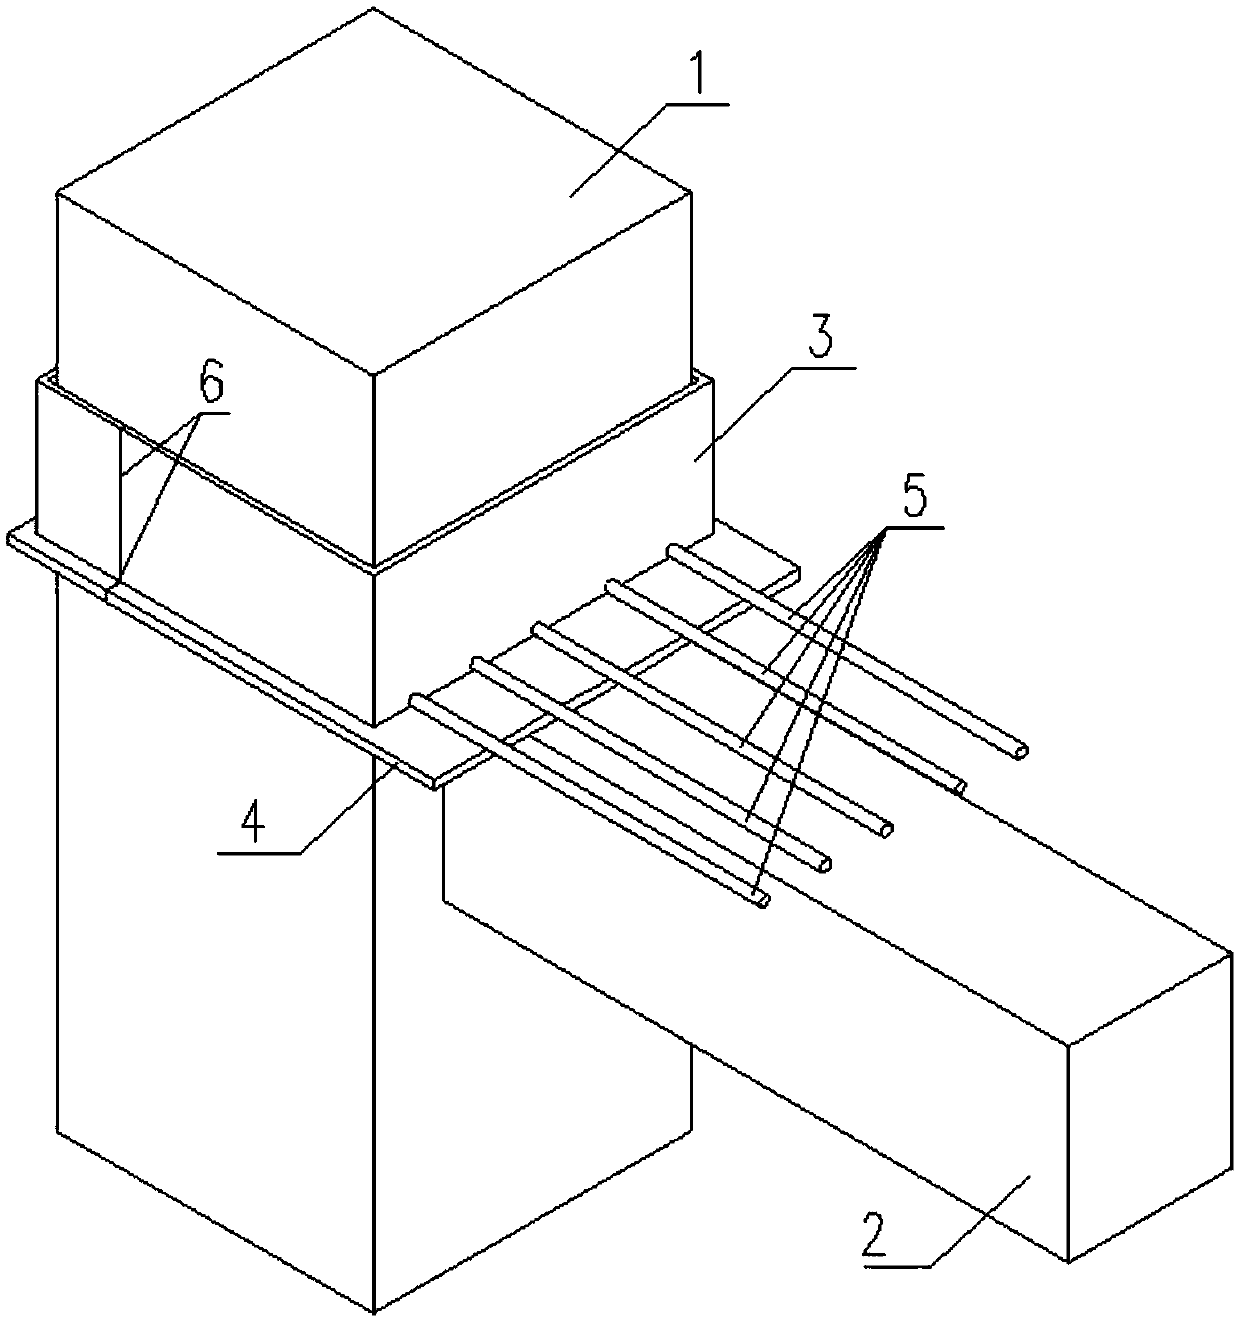 Steel joint for reinforcing and anchoring concrete beam and anchoring method